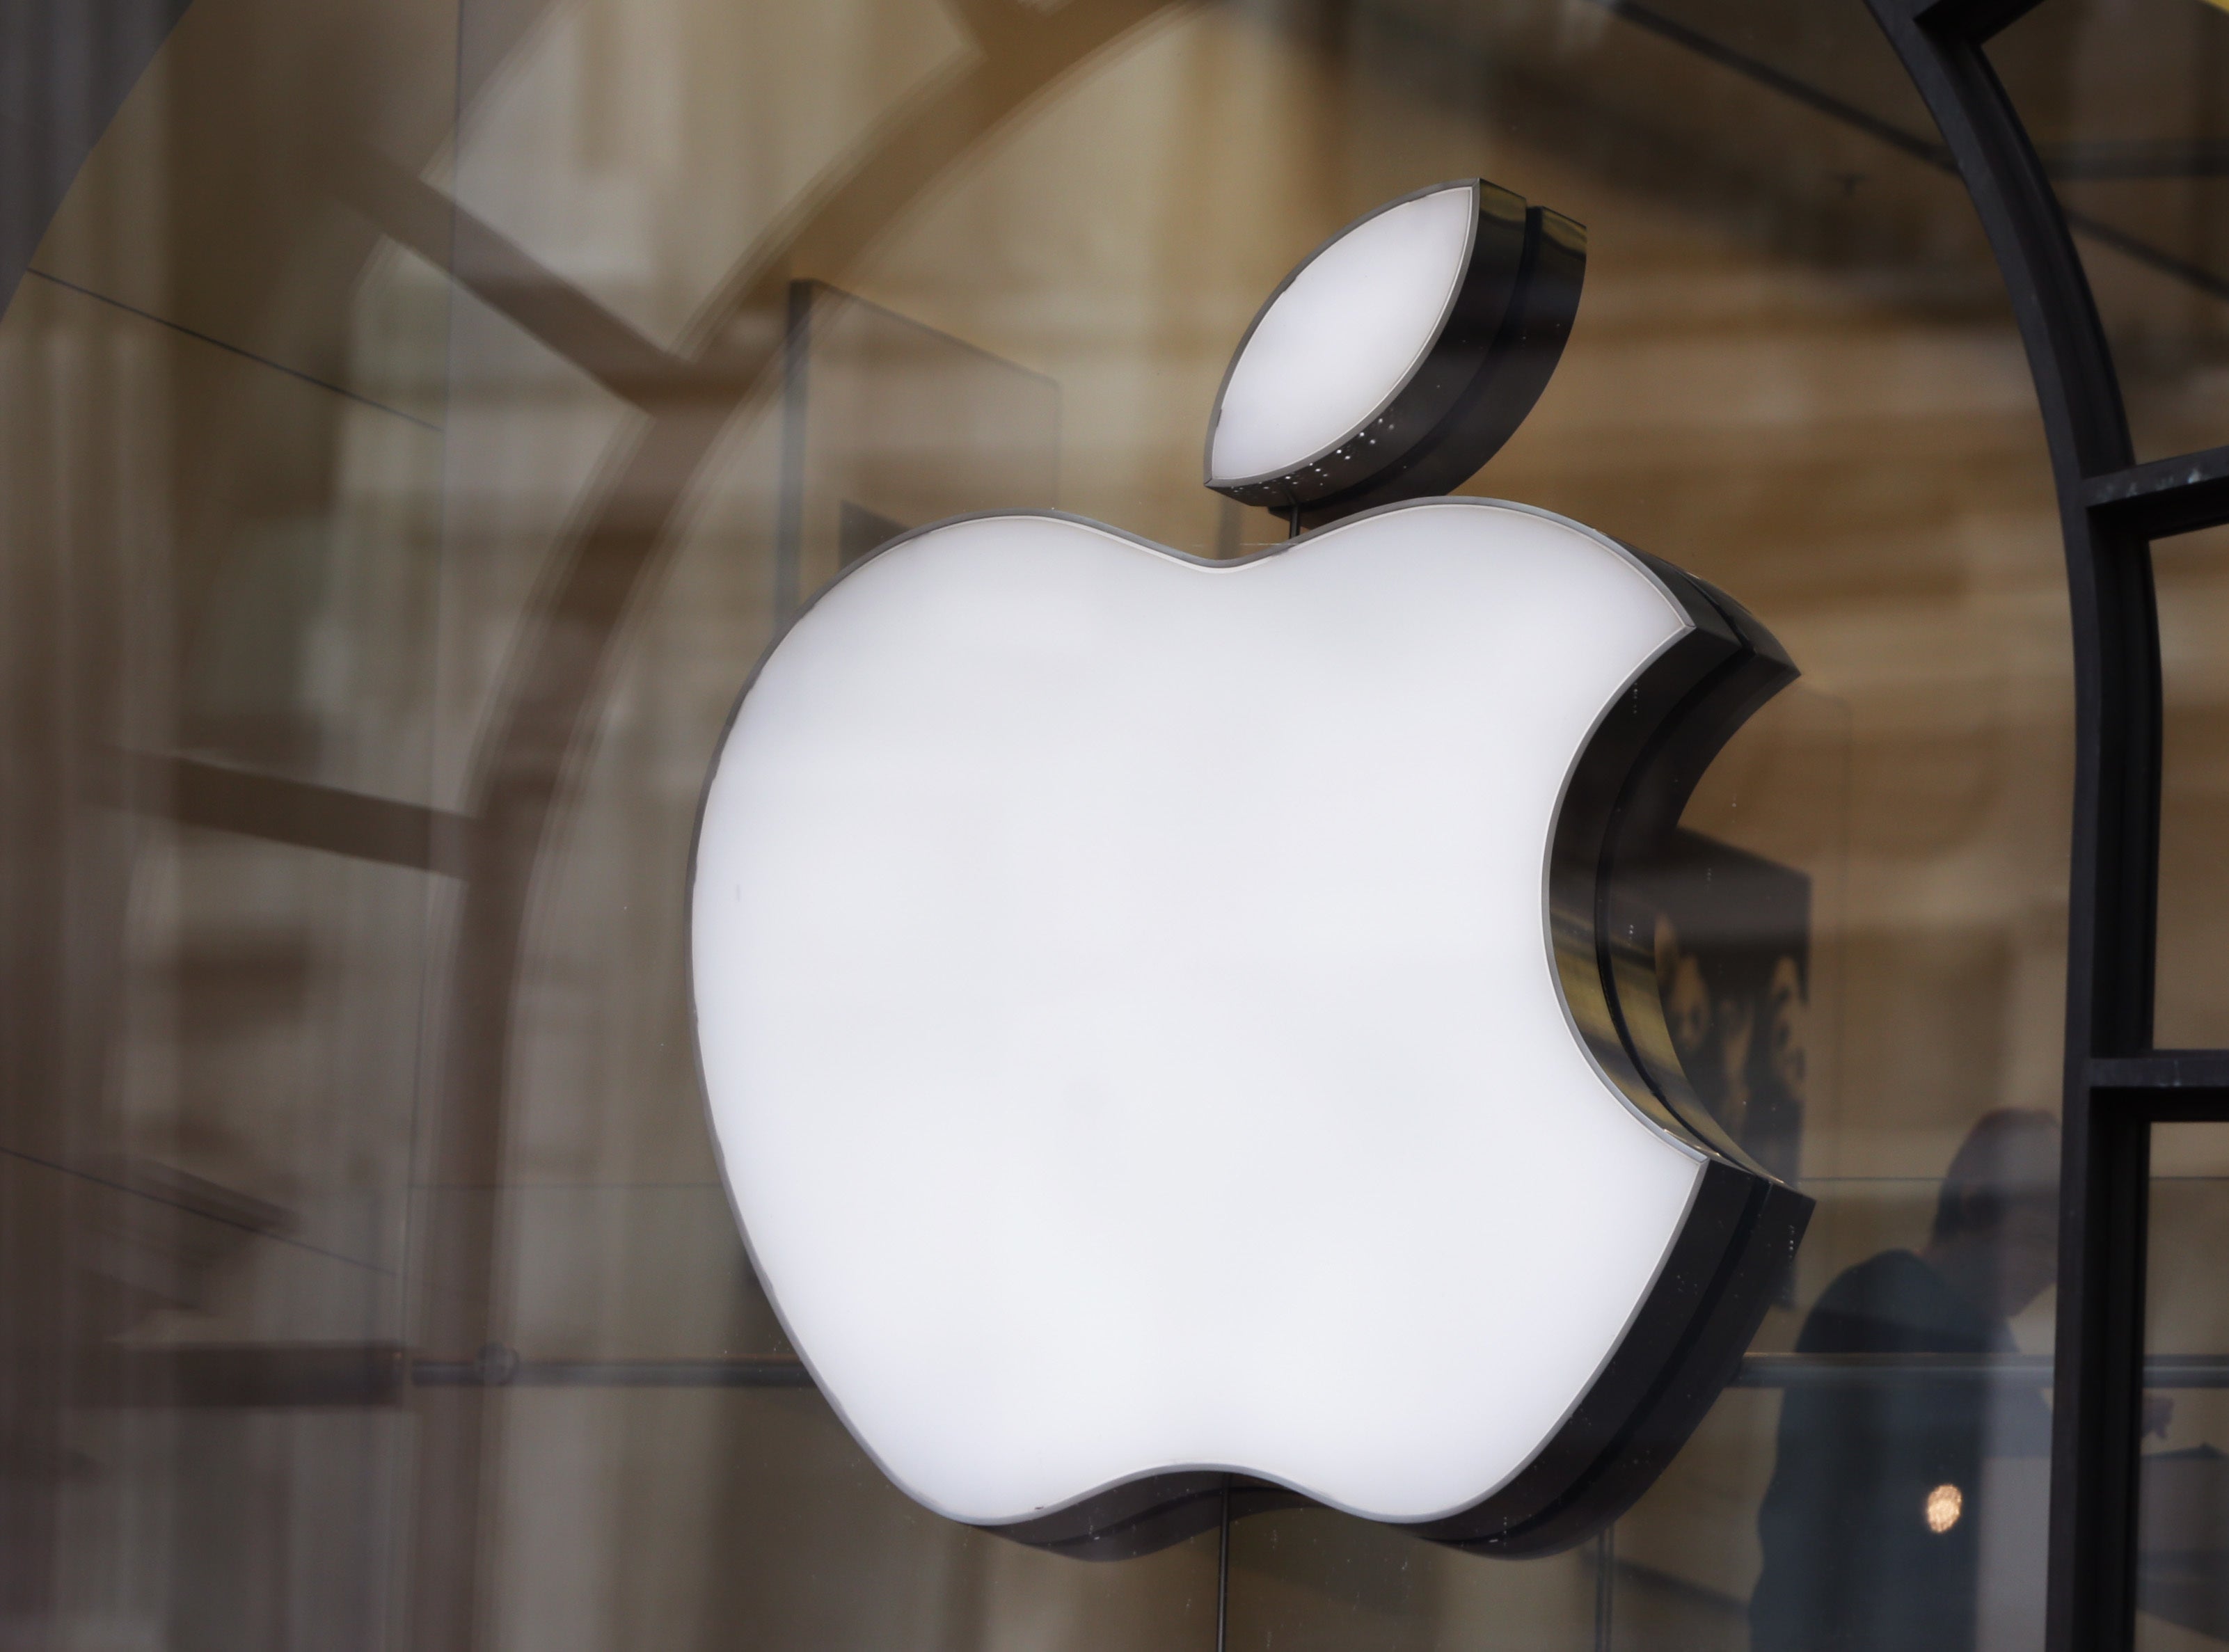 The logo in the window of the Apple Store on Regent Street, London. The technology giant has smashed the global record for quarterly profits after racking up a surplus of 18 billion US dollars (£11.9 billion).